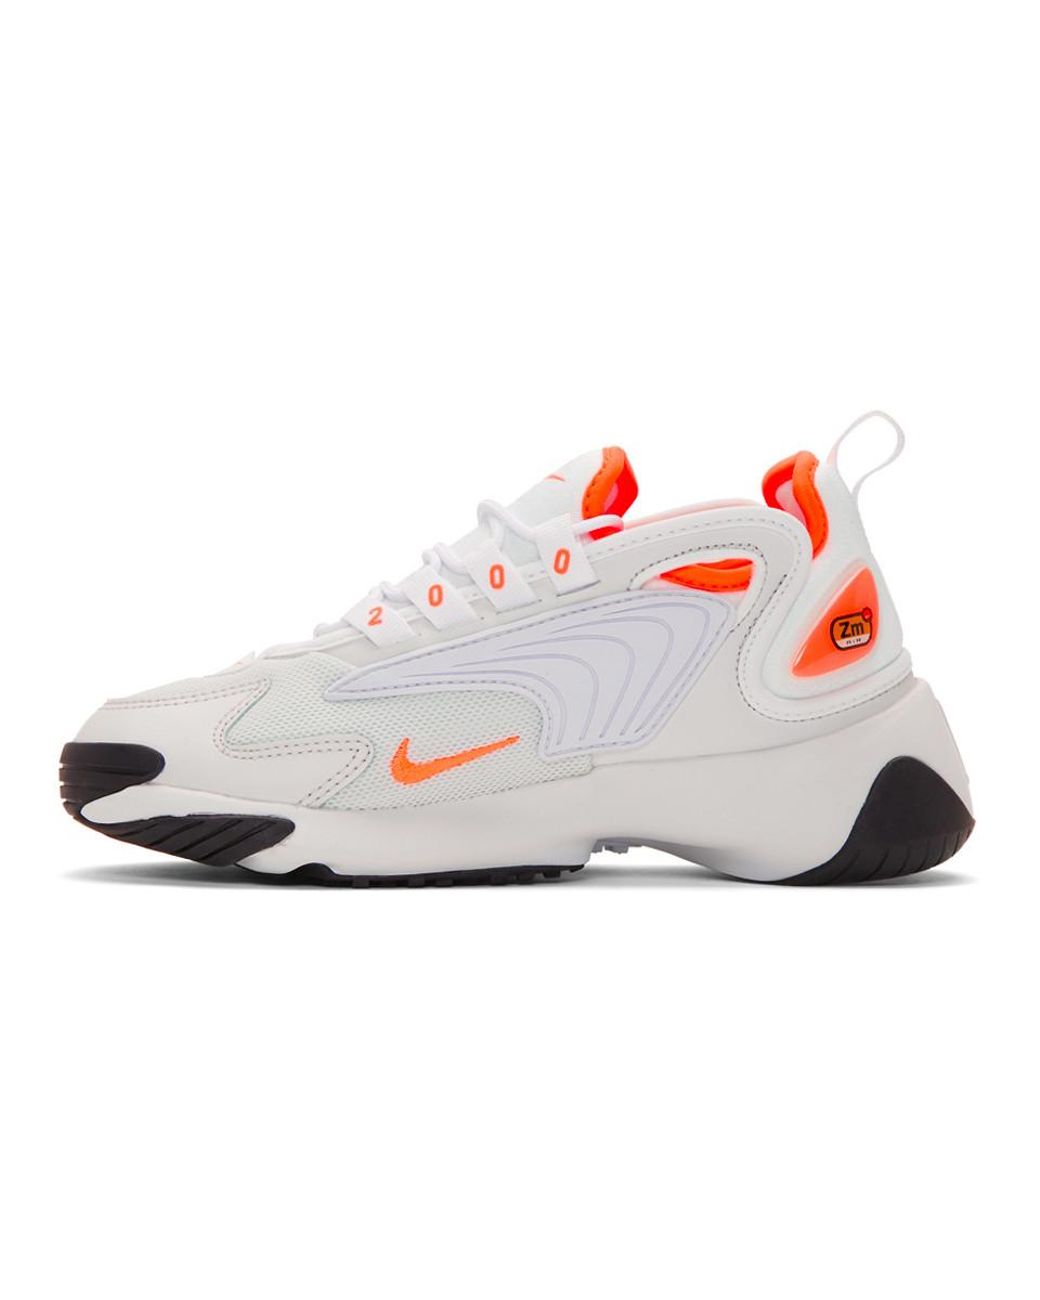 Nike Leather Off-white And Orange Zoom 2k Sneakers | Lyst